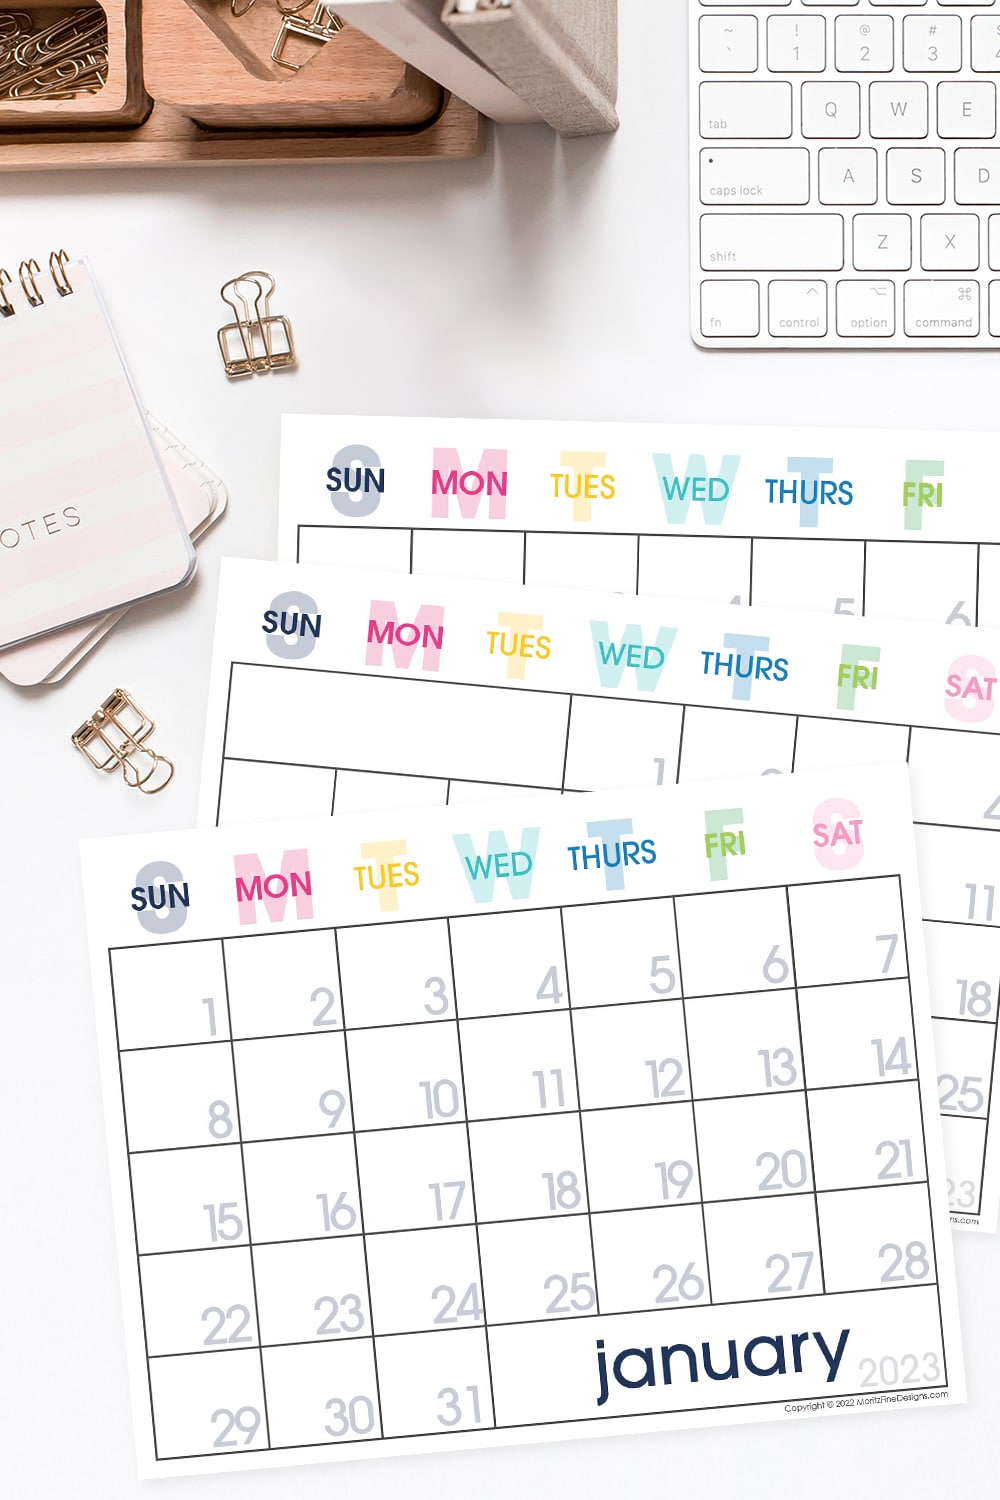 Get organized with the free printable 2023 calendar. Easy to download, print and put to use. It's even digitally editable!